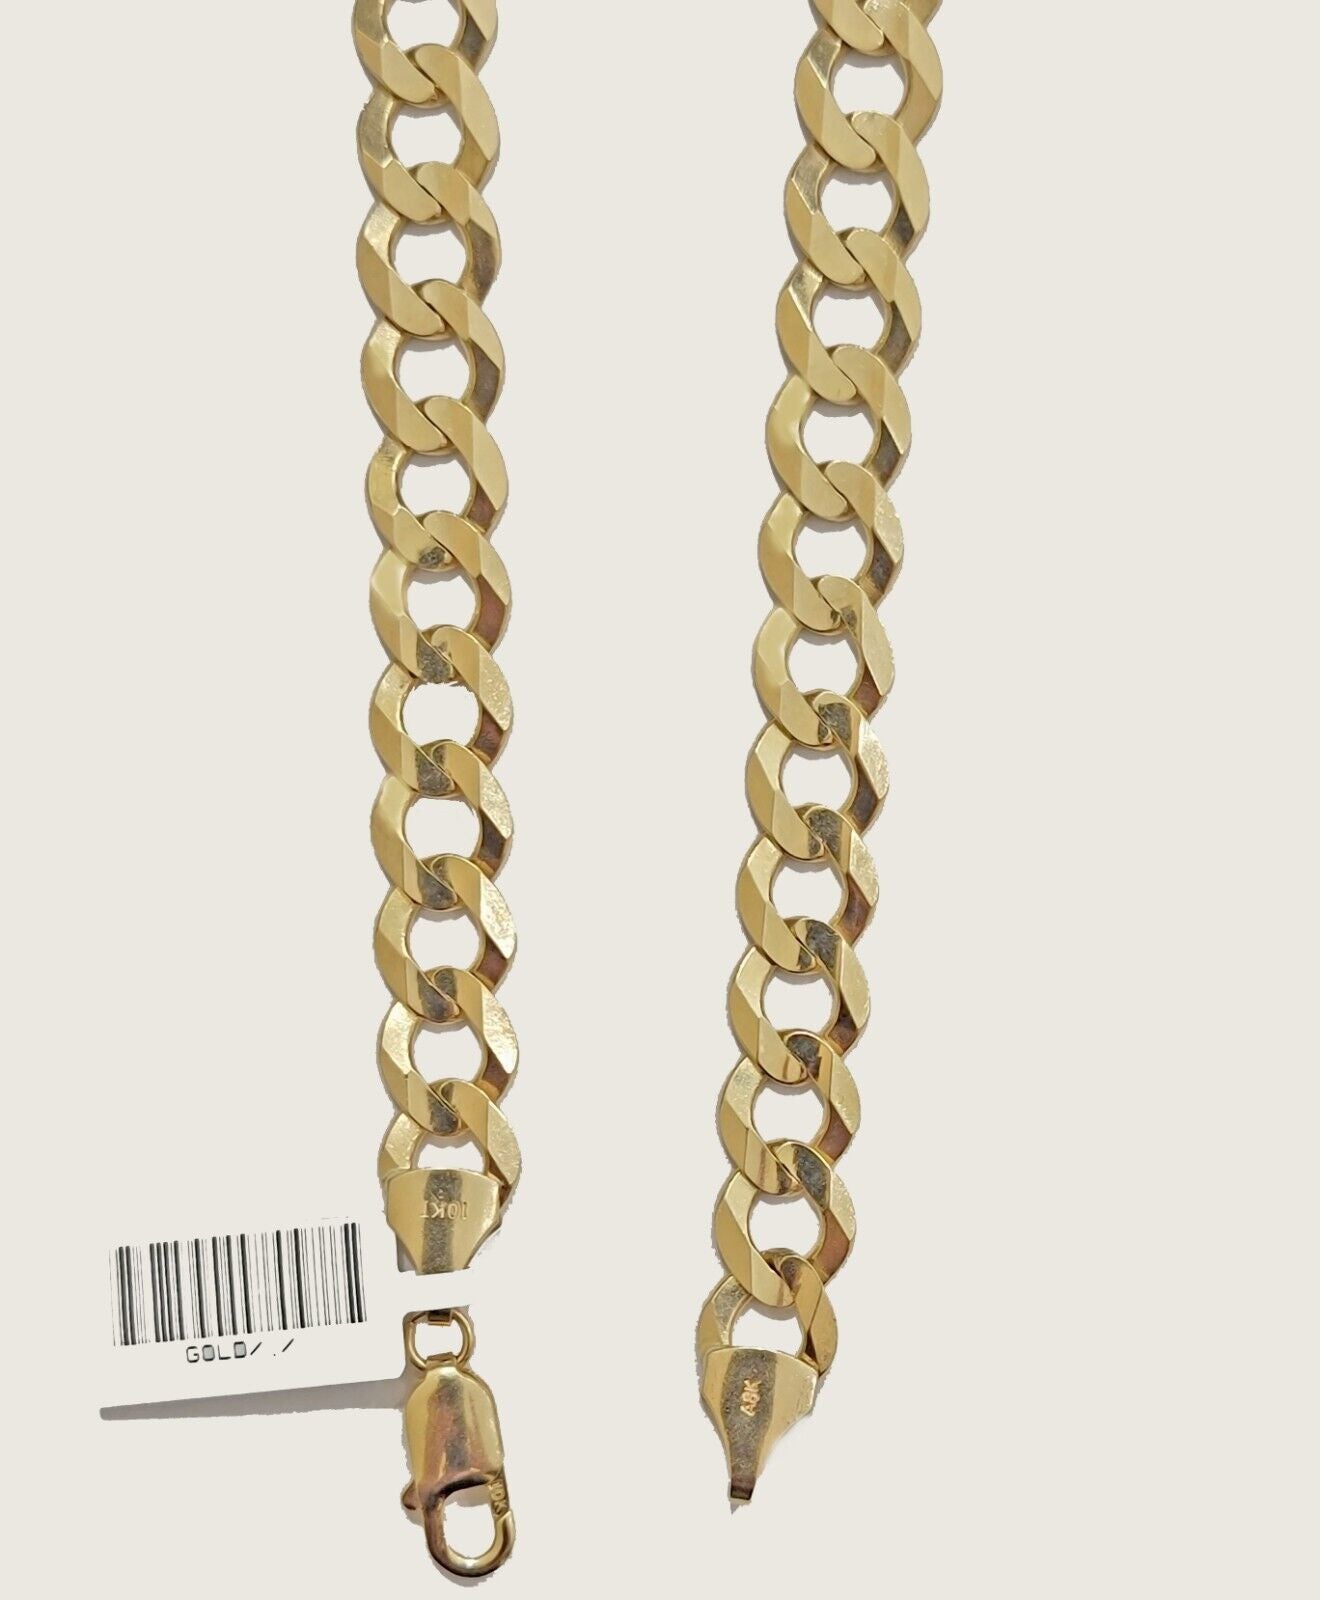 Solid 10K Yellow Gold Cuban Curb Link Chain Necklace 9mm 22 Inch Mens, Real 10kt